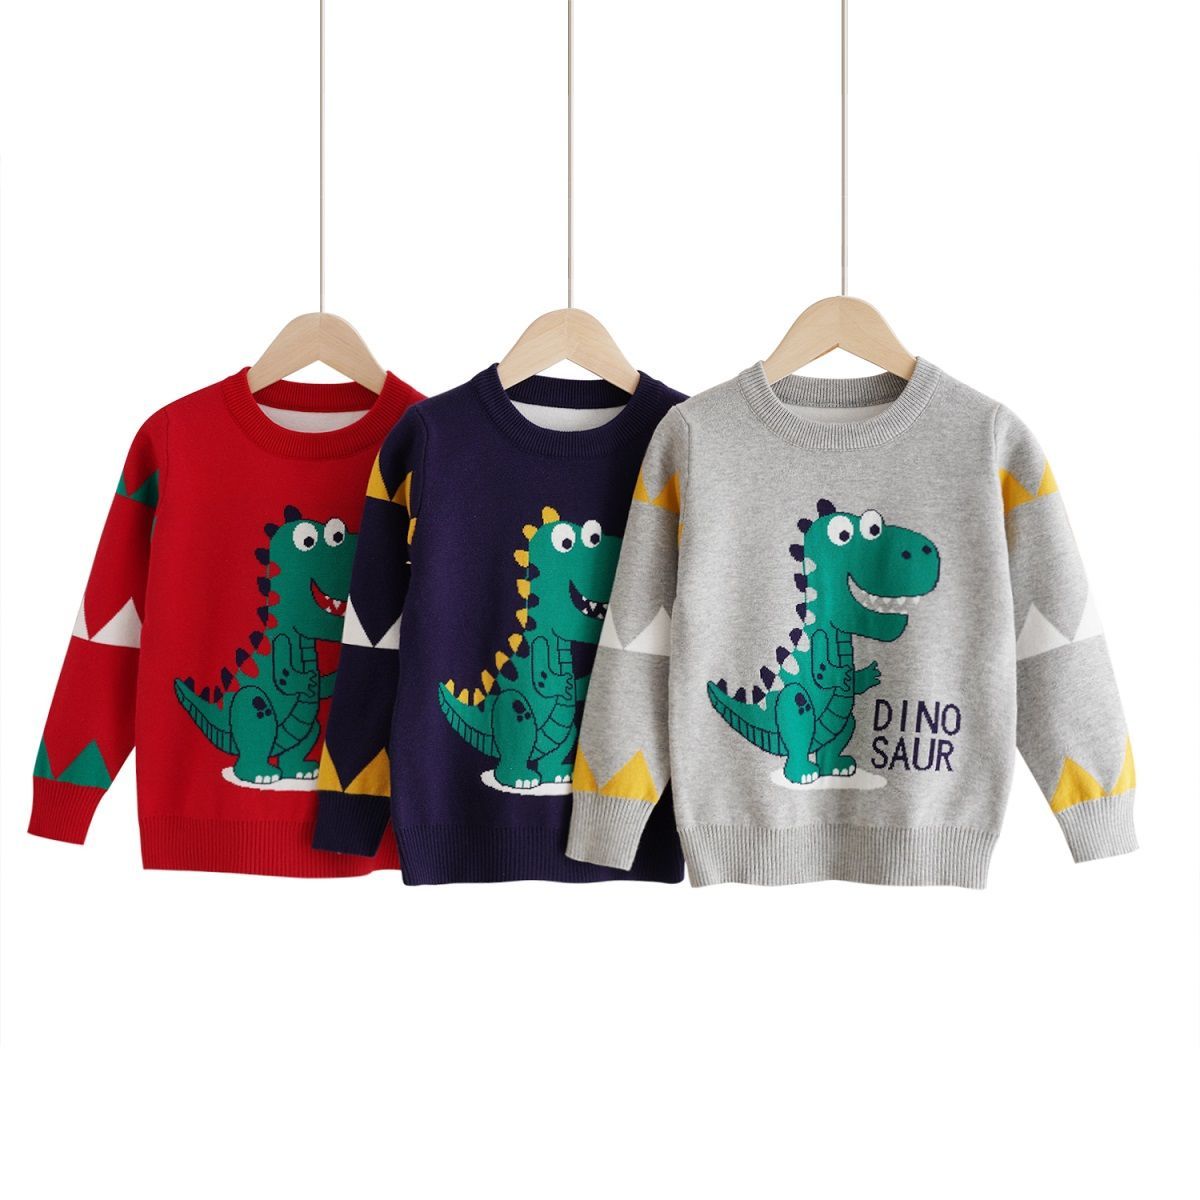 Xinmi children's clothing autumn and winter boys pure cotton plus velvet thick sweater saber-toothed dinosaur cartoon baby children's pullover sweater